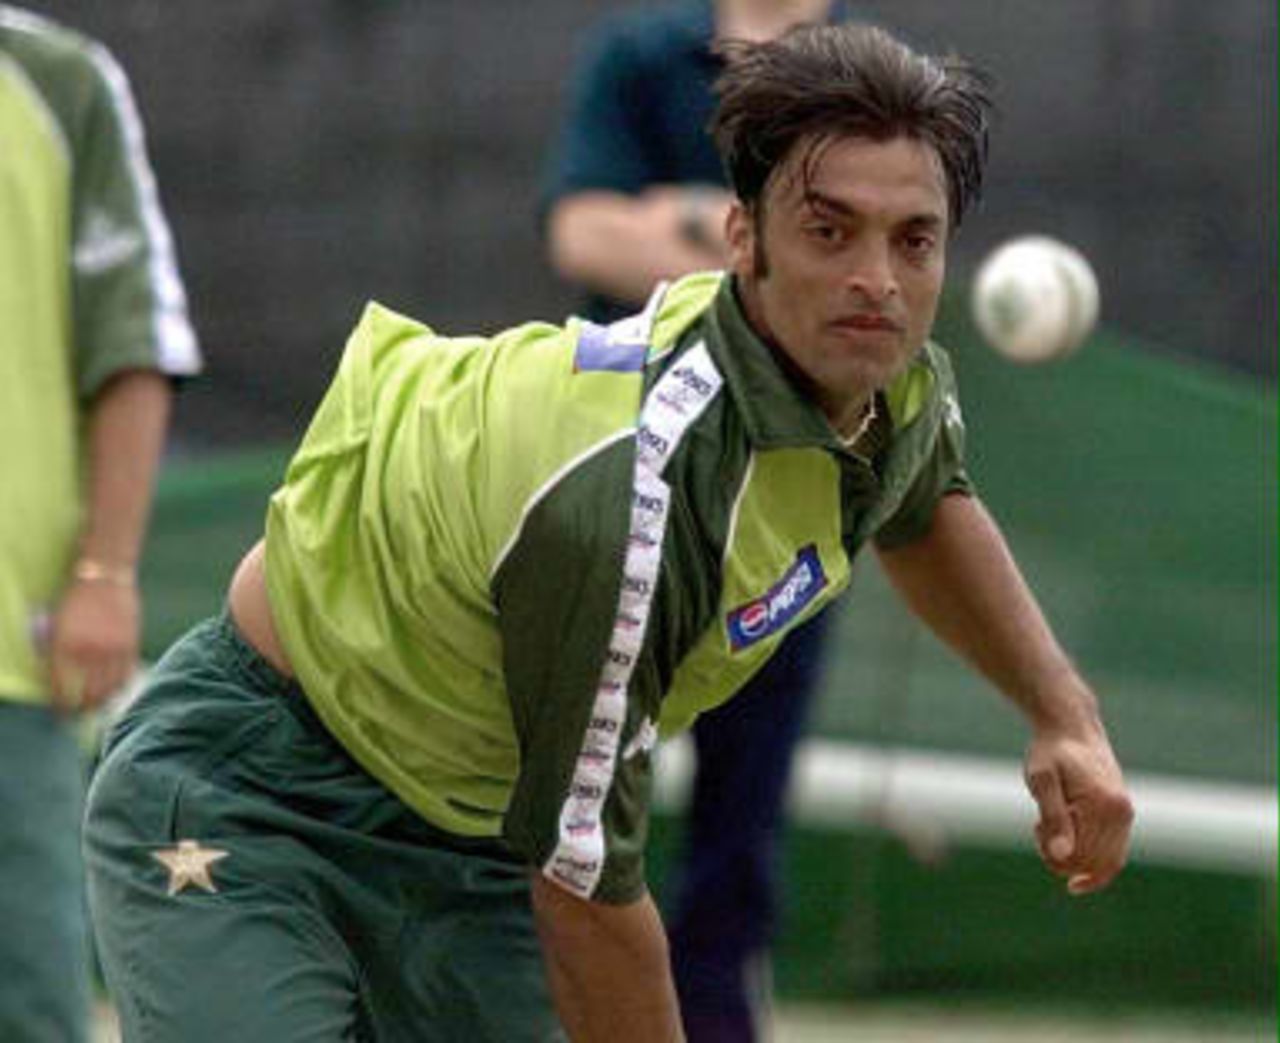 Pakistan pace bowler Shoaib Akhtar keeps his eye on the ball during a nets practice session at Old Trafford, Manchester 15 June 1999 prior to his sides Cricket World Cup Semi Final match against New Zealand 16 June 1999